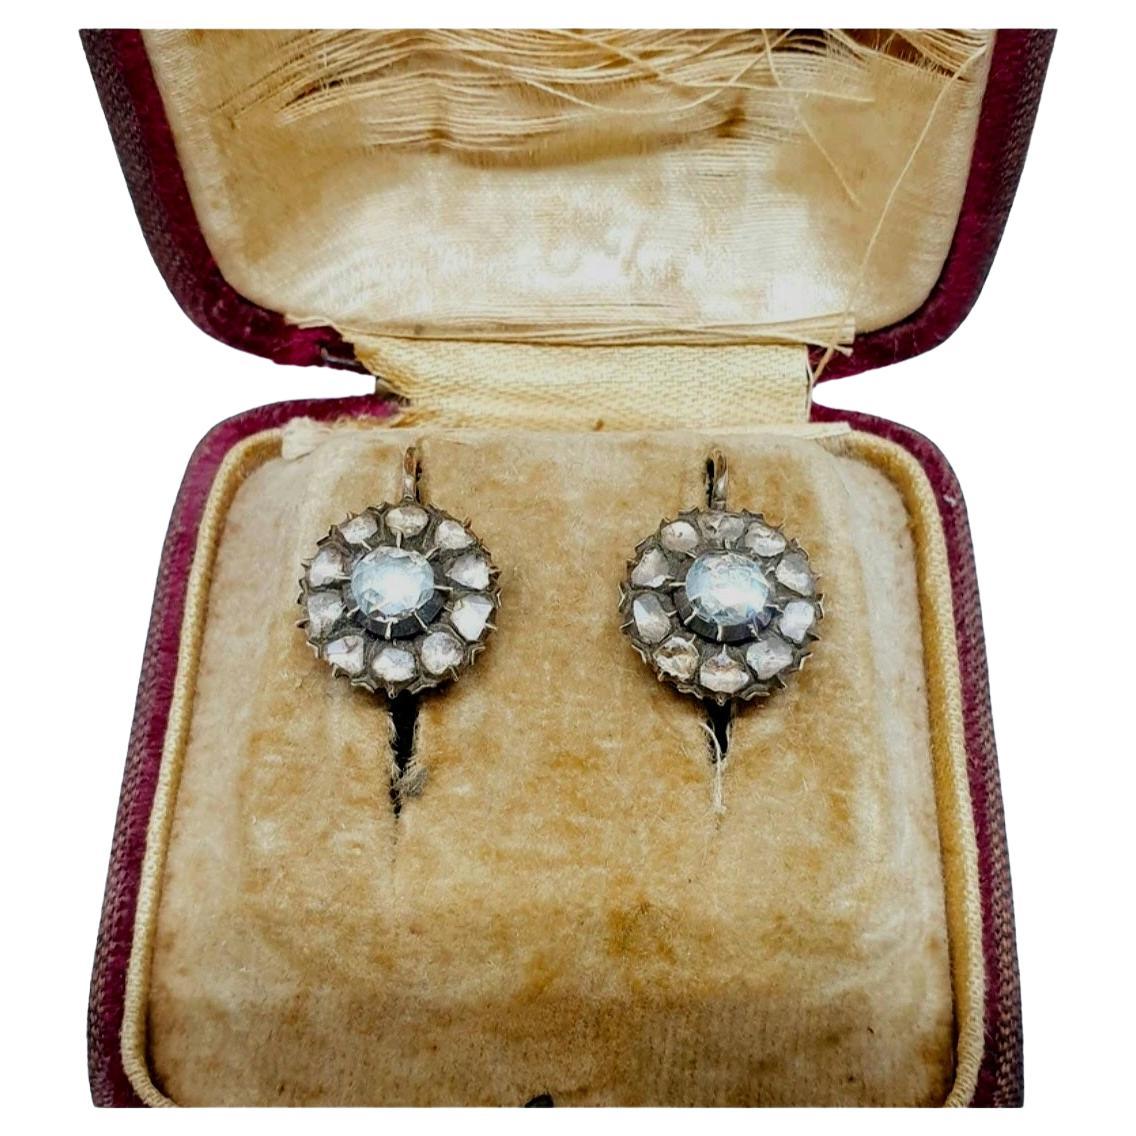 Antique victorian 10k gold rose cut diamond earrings centered with 1 large diamond flanked with smaller diamonds in detaled prongs with estimate weight of 1.5 carats back foiled dates back to 1880/1890.c